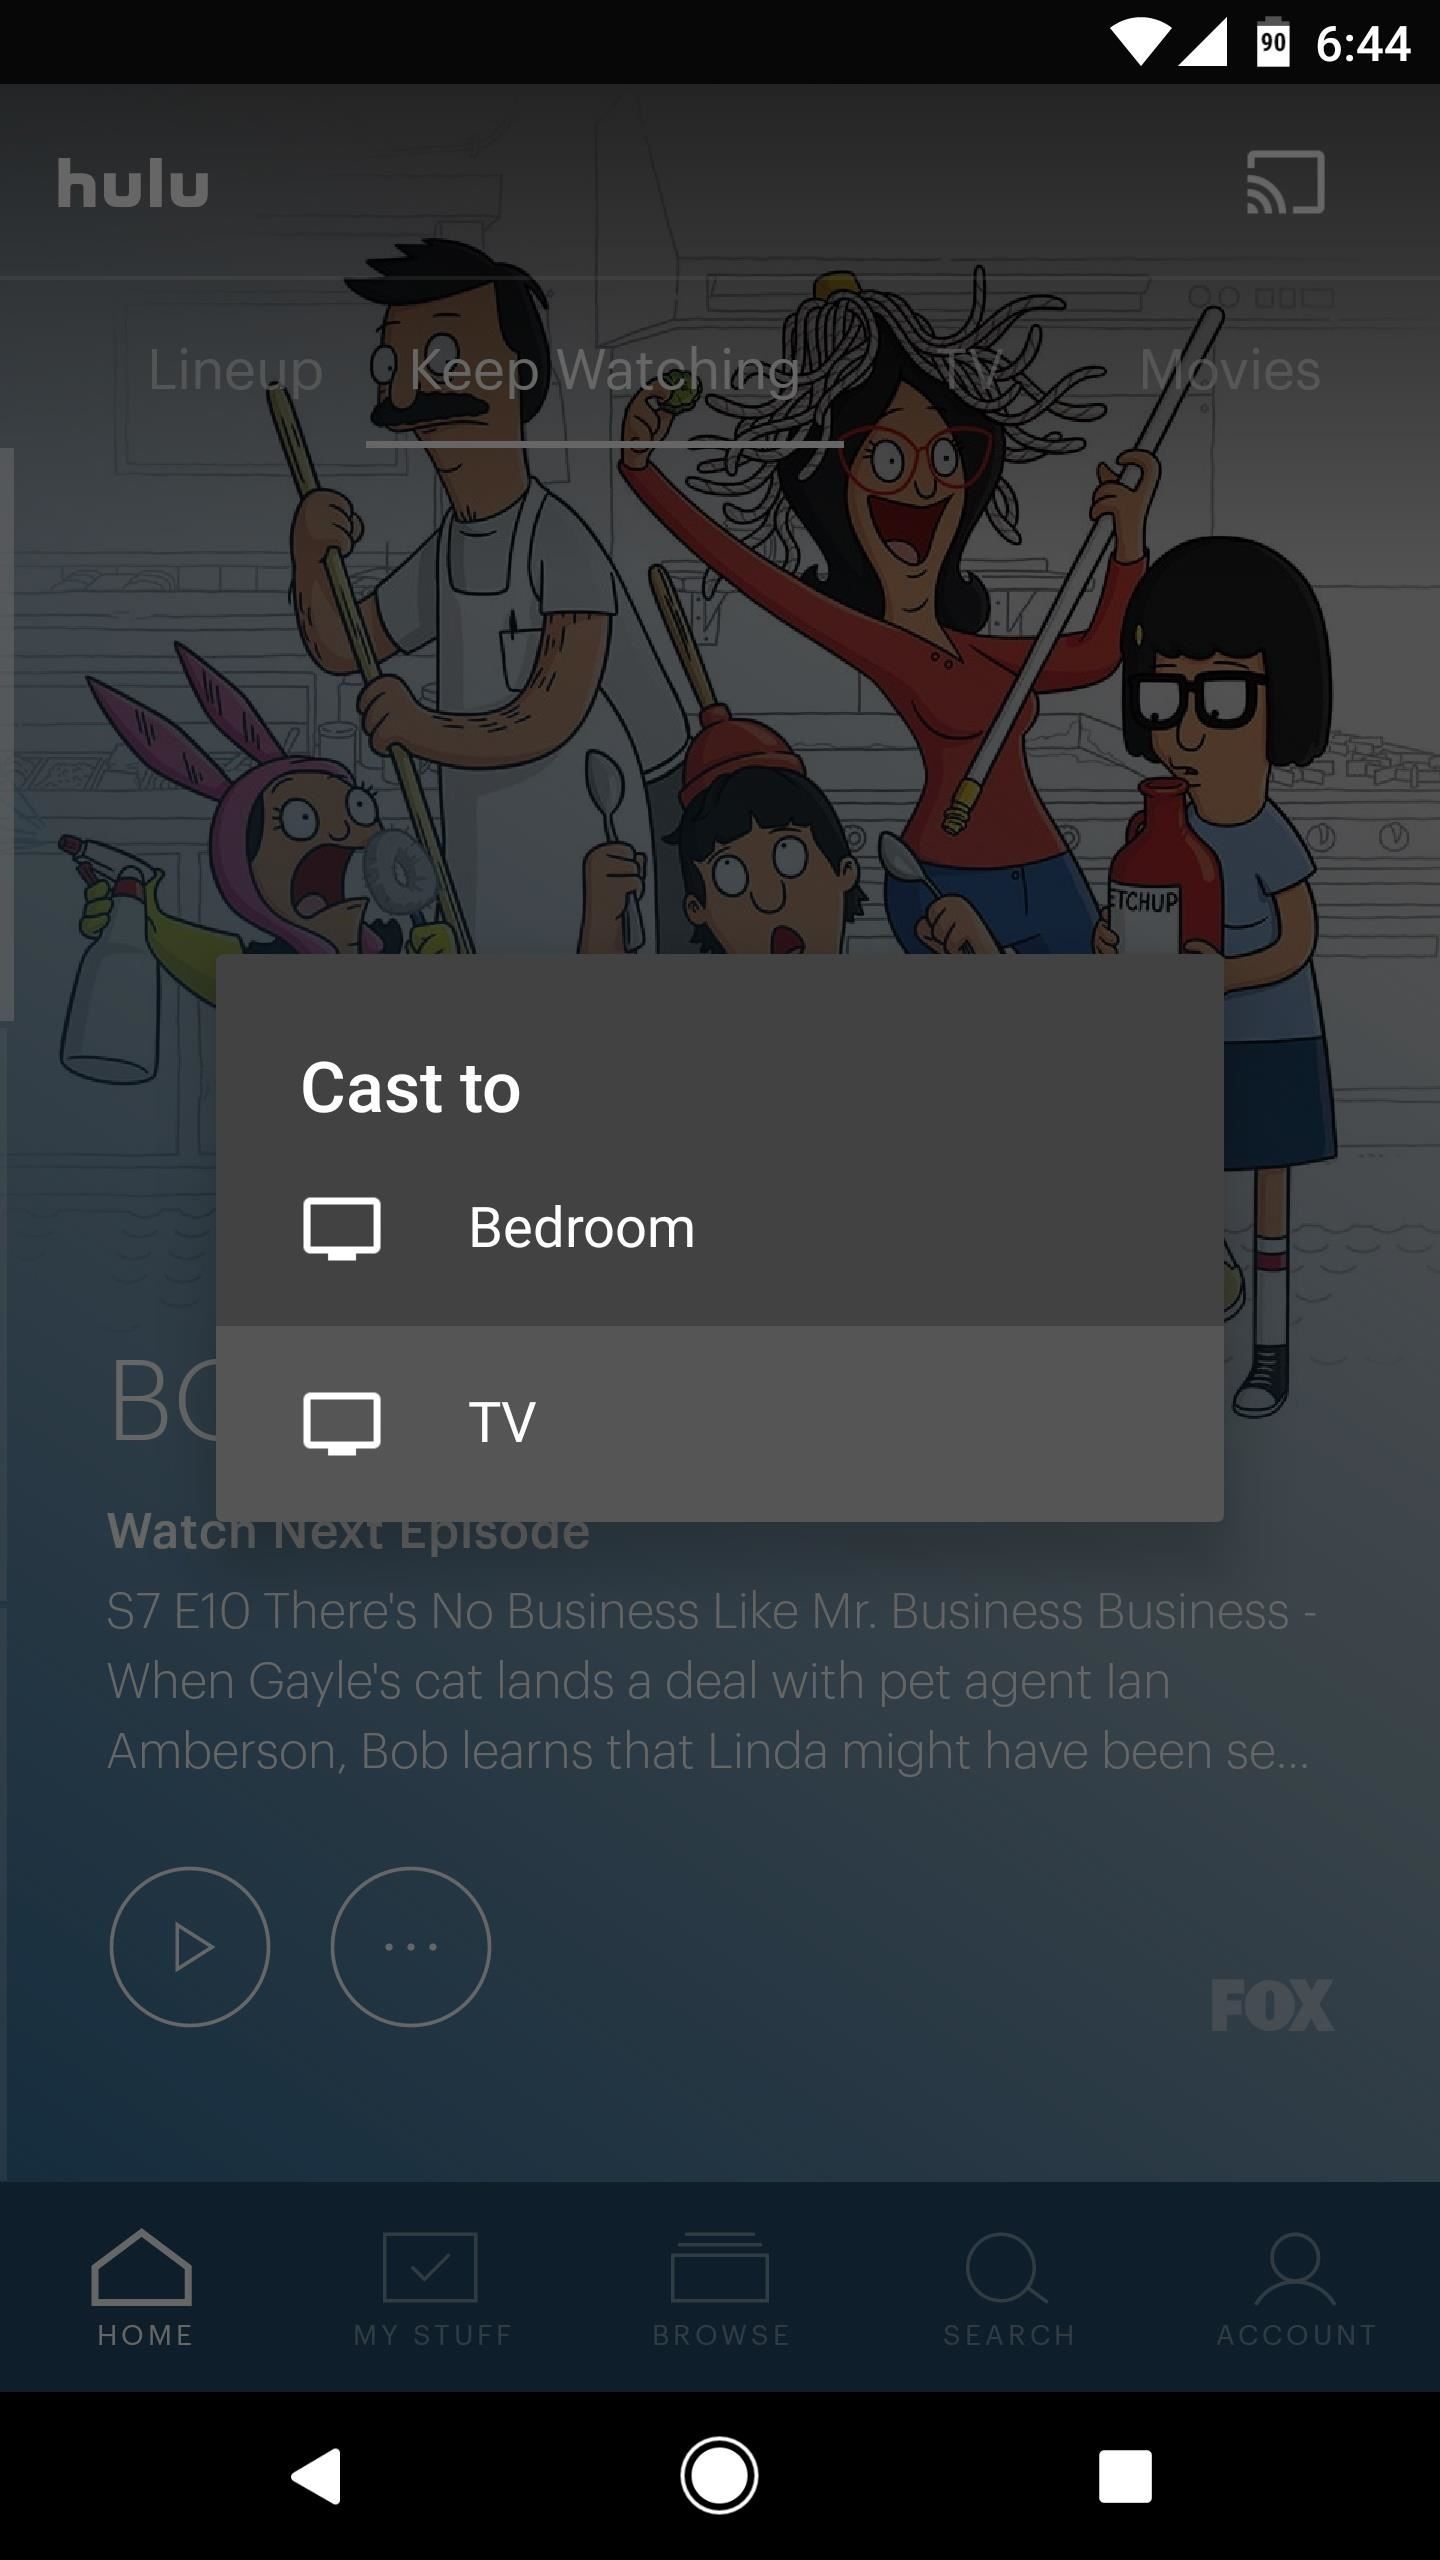 How to Cast Hulu on TV